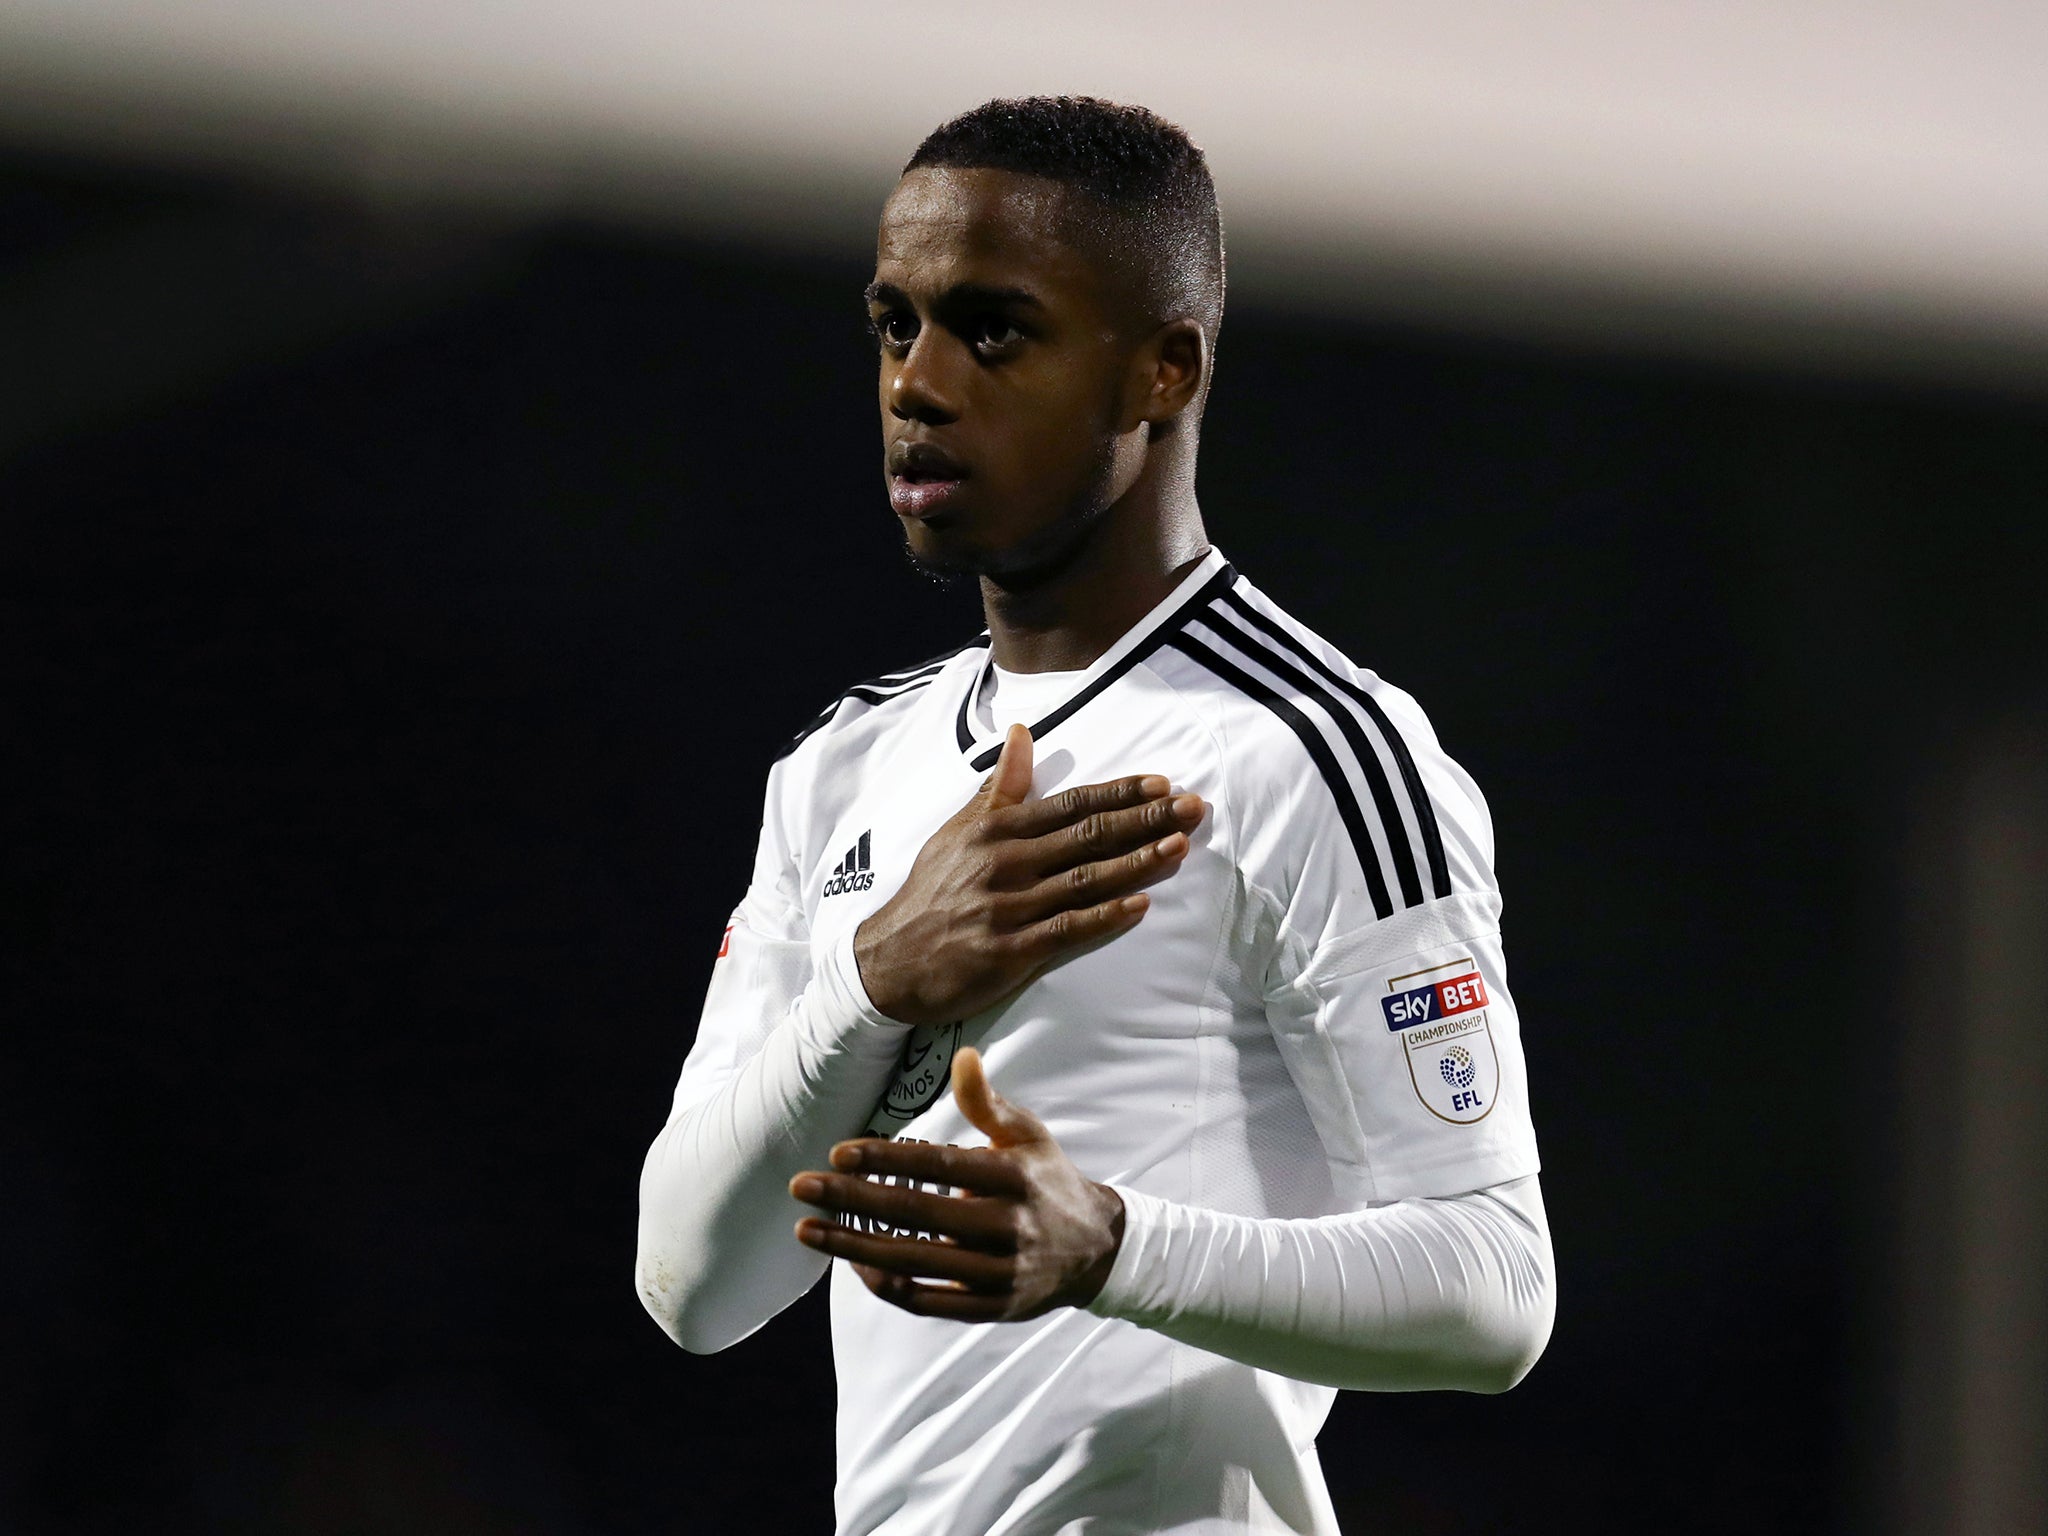 Ryan Sessegnon was named the Championship player of the season at the EFL Awards night